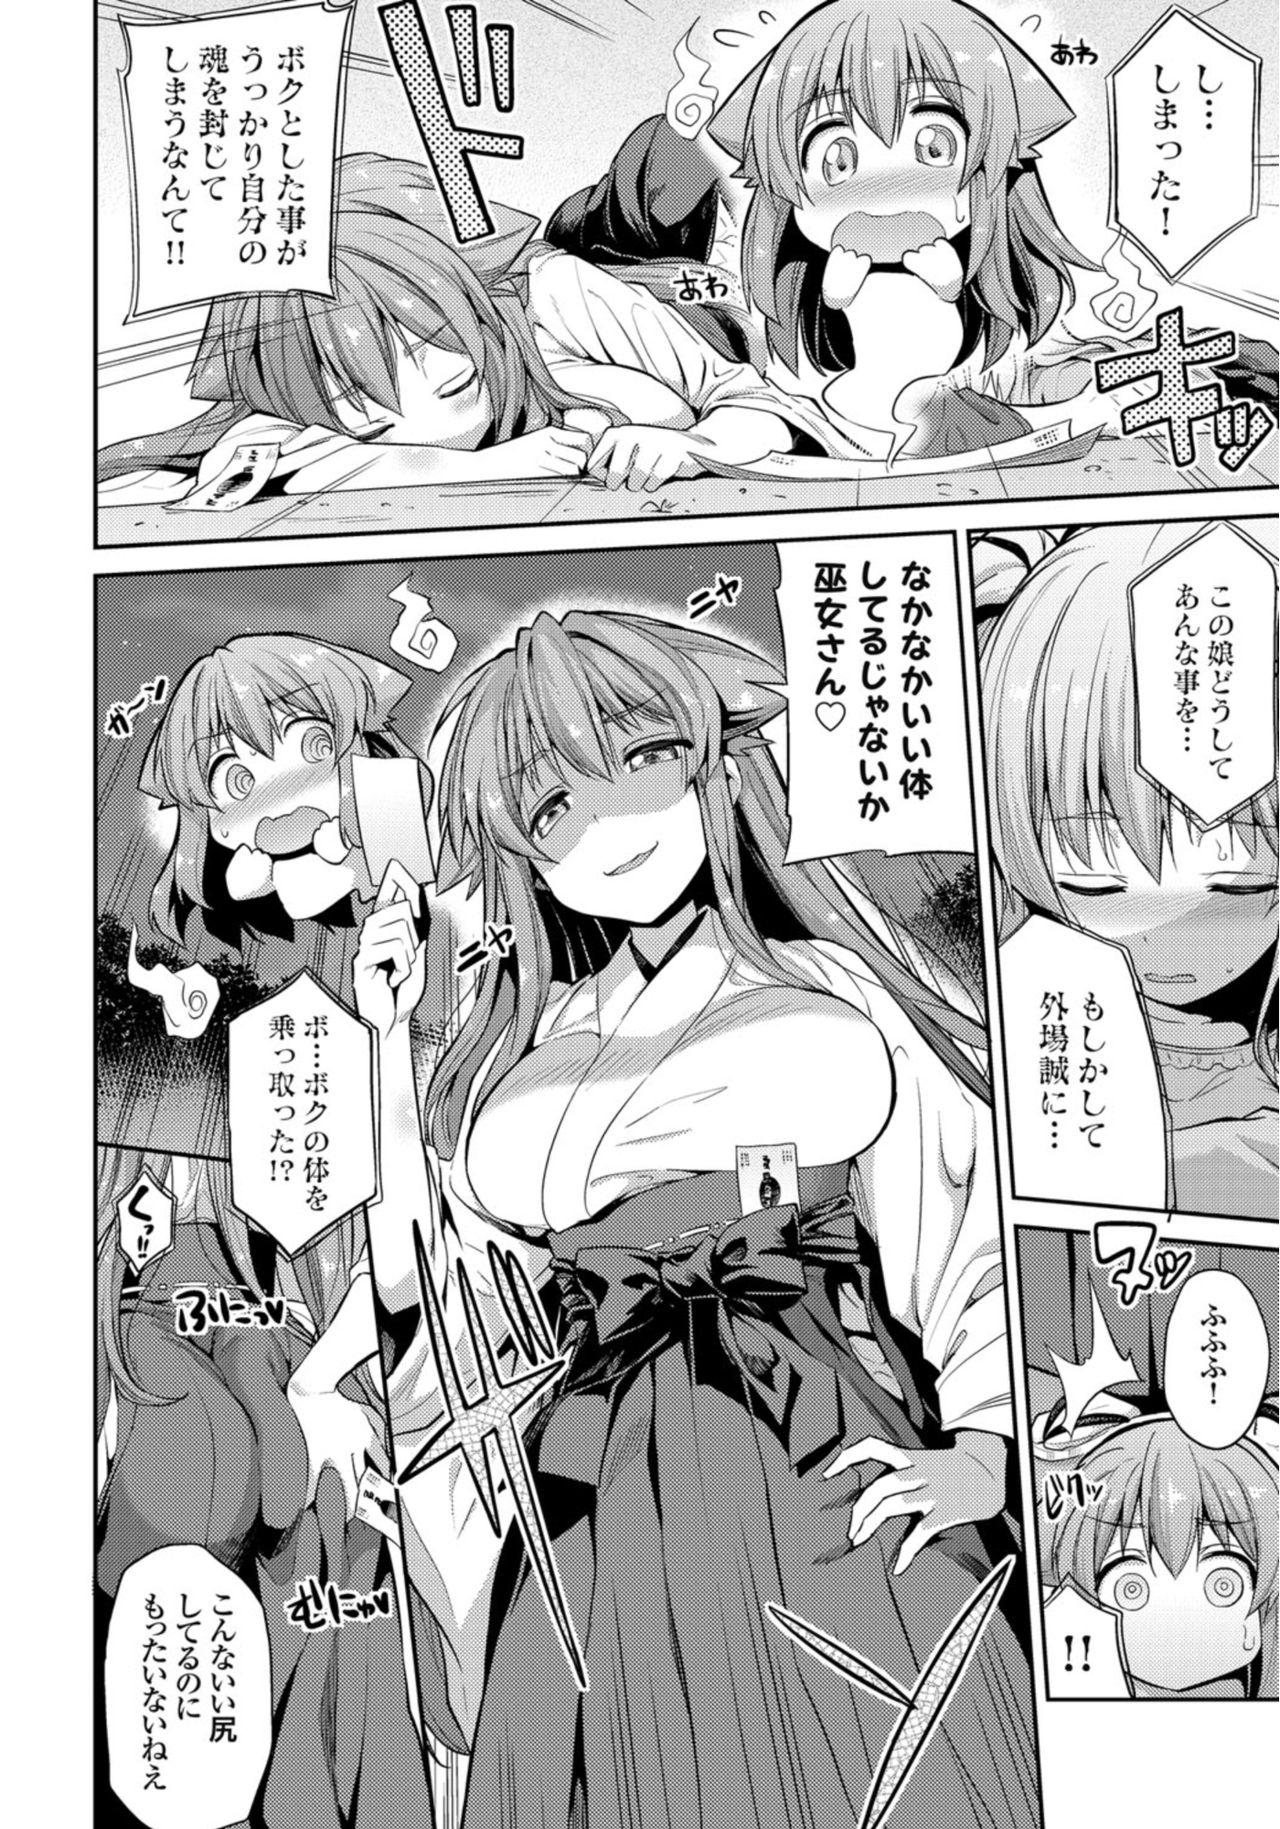 Riding 憑りつき×乗っ取り×孕ませろ！肆憑き 〜ドロリ濃厚！退魔巫女種付けレイプ！〜 Leather - Page 4